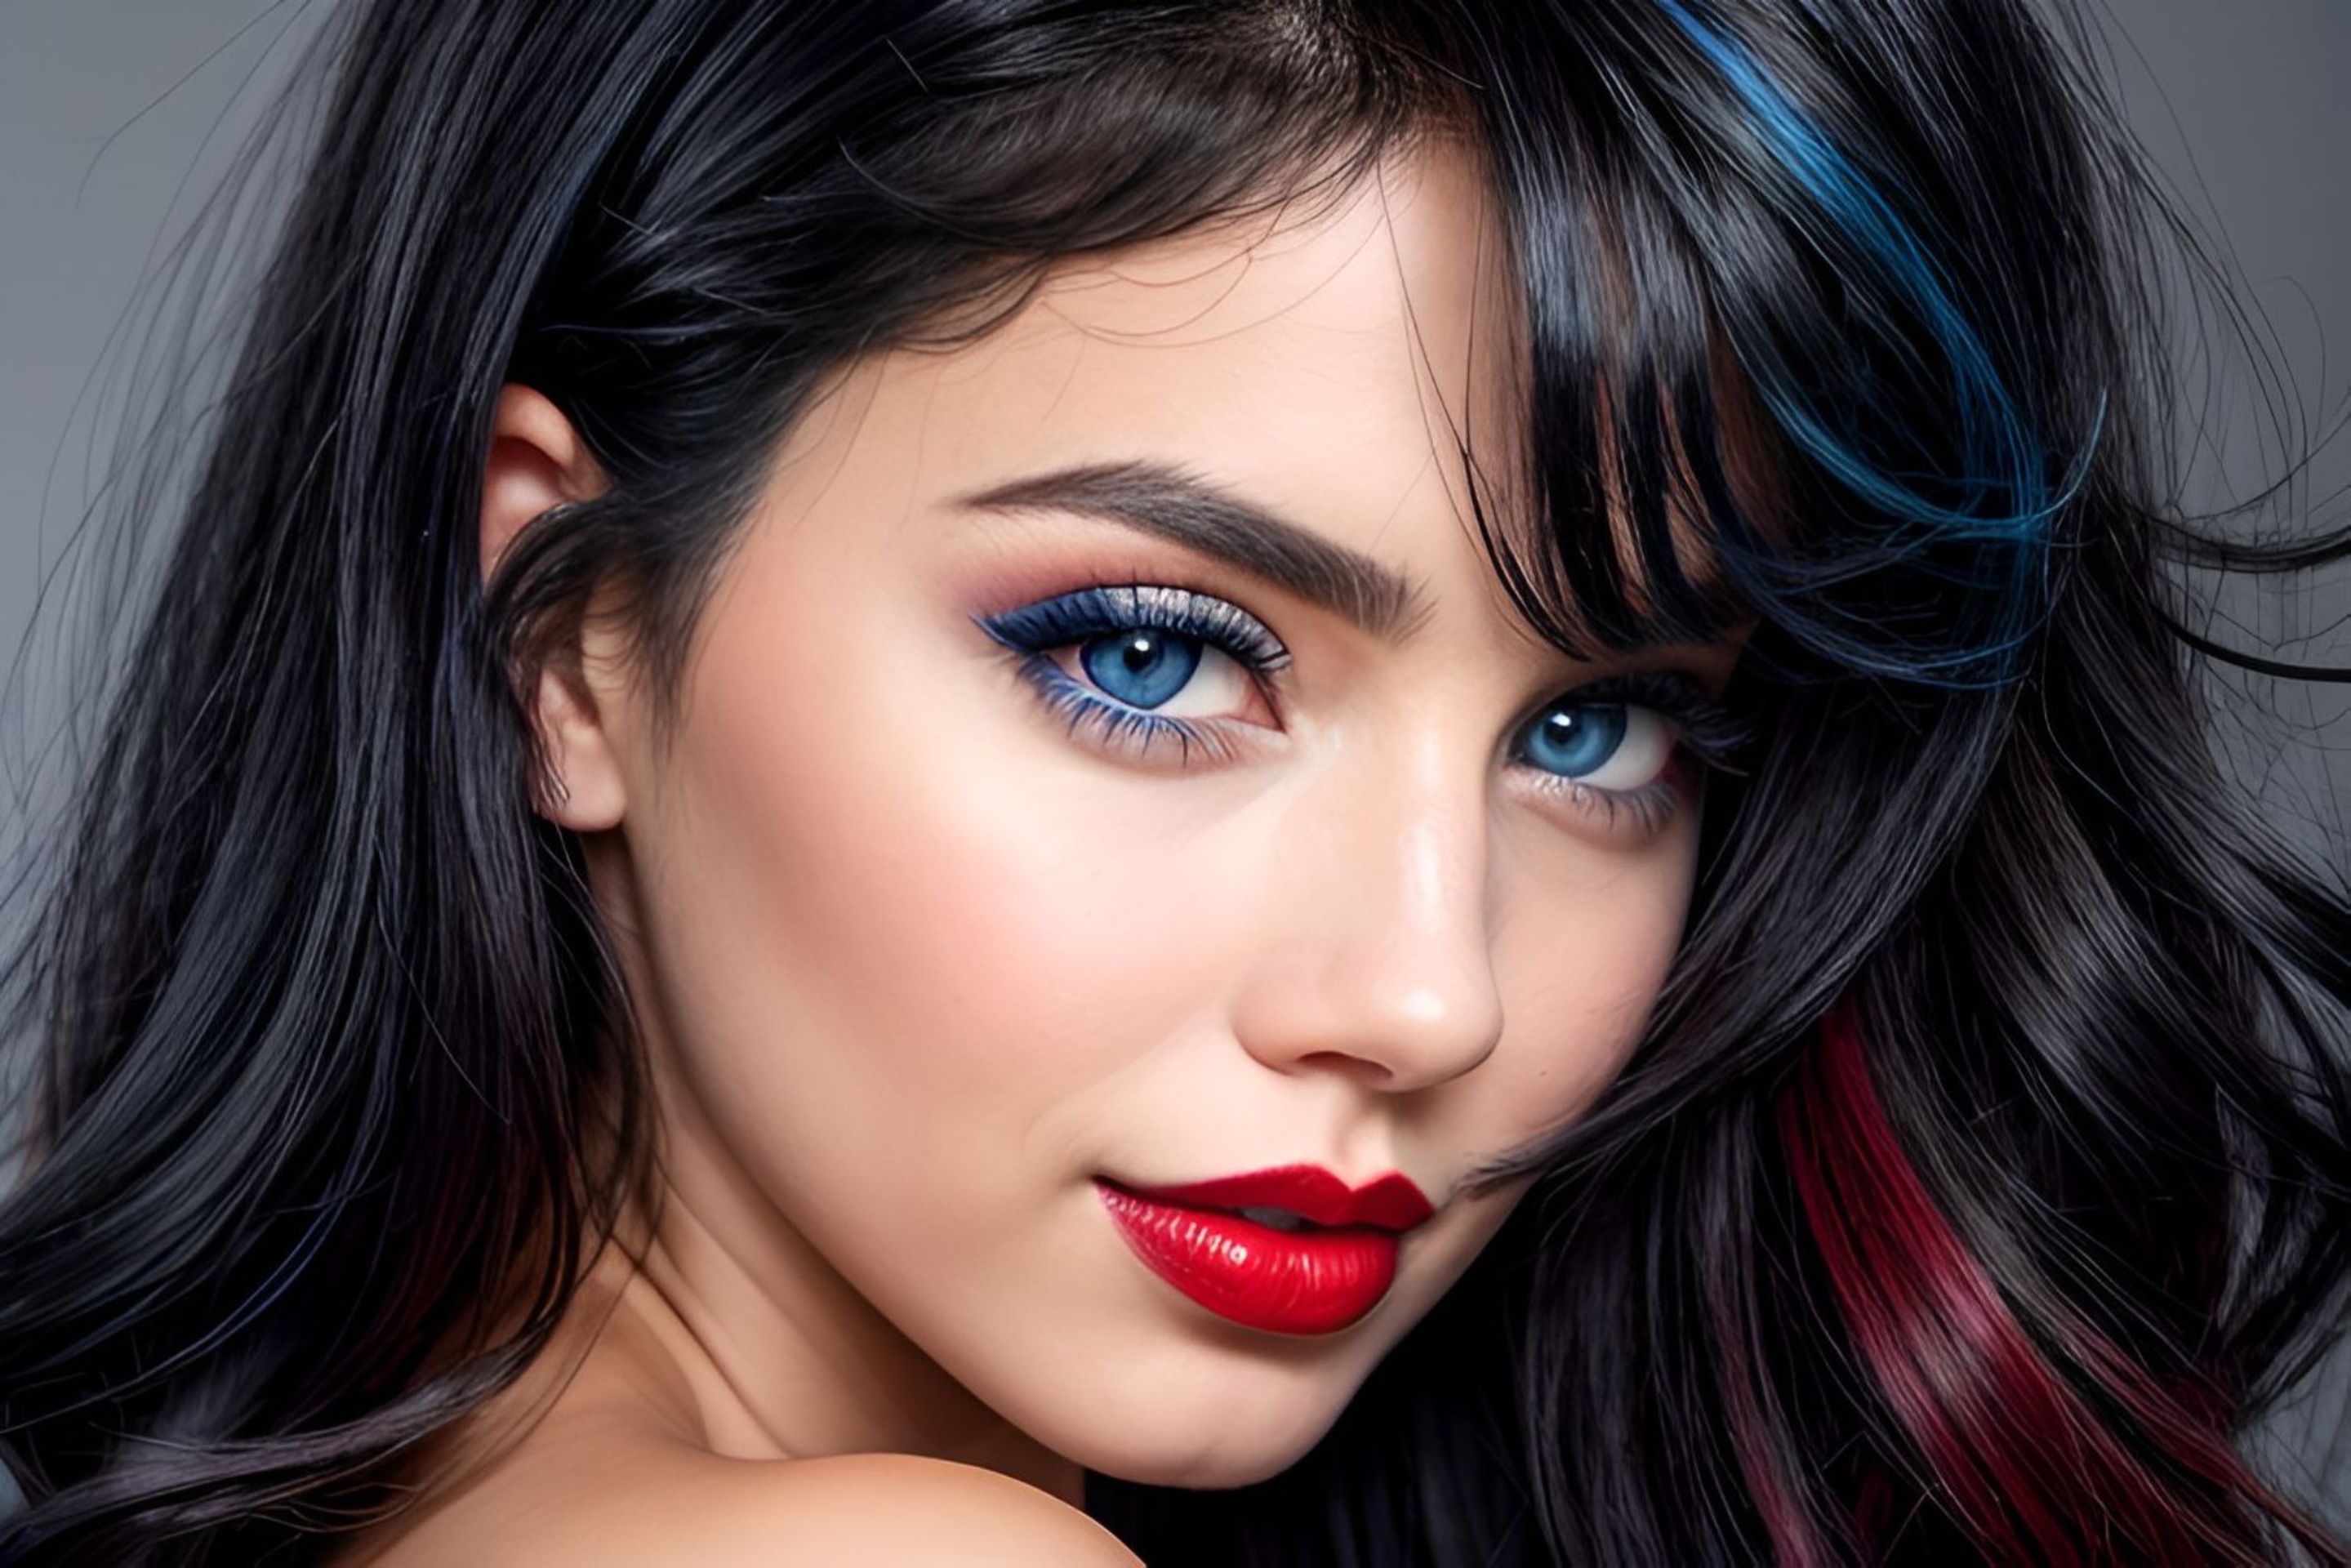 Free photo Beautiful brunette, With blue eyes, And red lipstick, Looking at the camera, Photo.